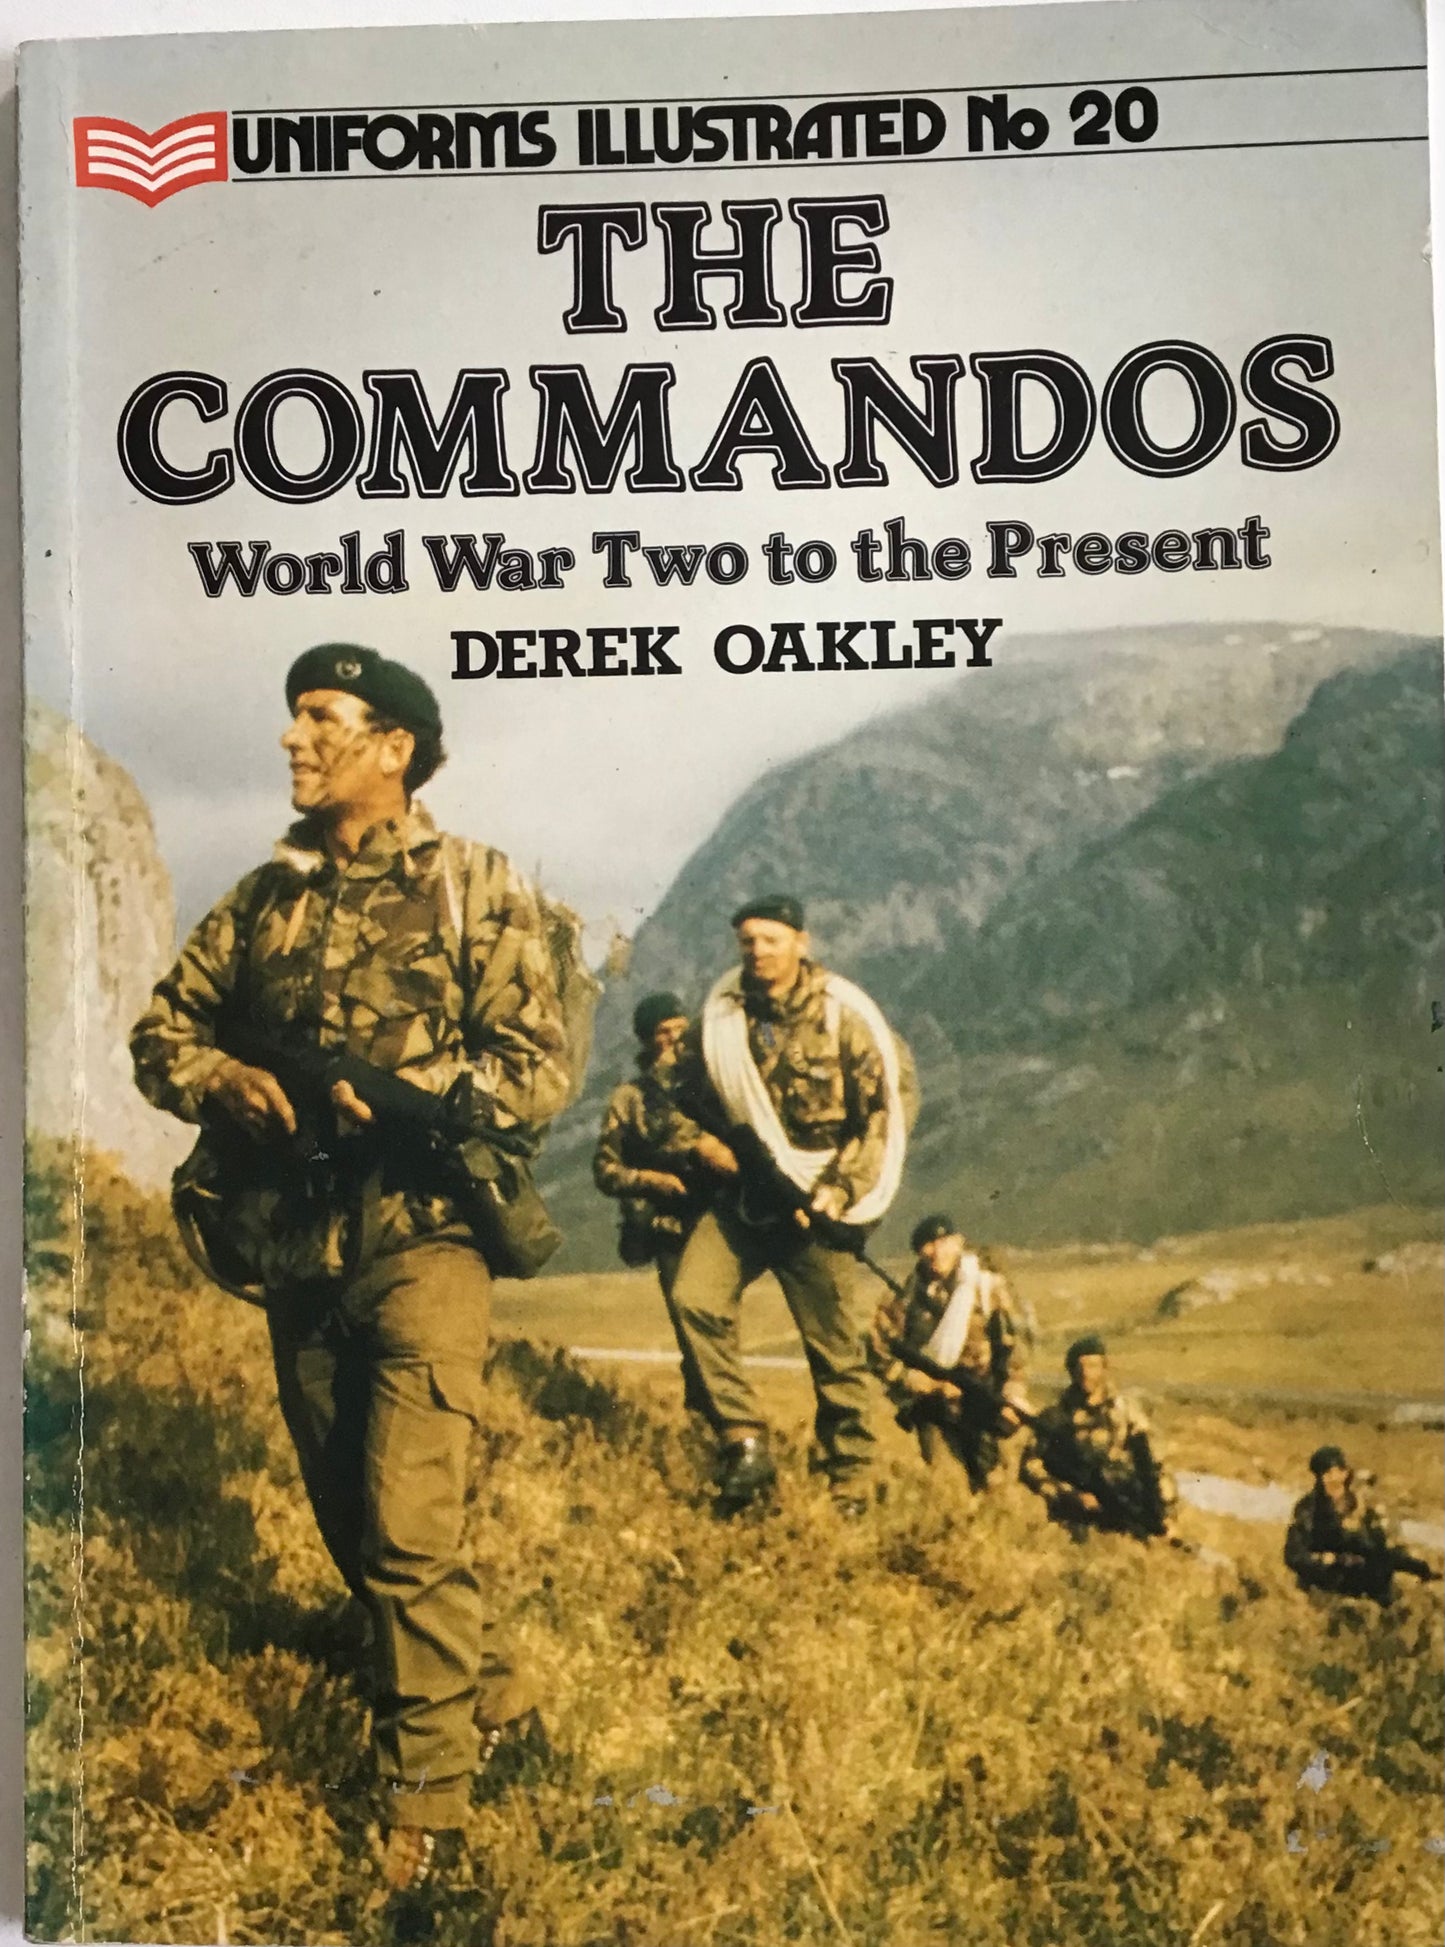 Uniforms Illustrated No.20 The Commandos: World War Two to the Present by Derek Oakley - Chester Model Centre